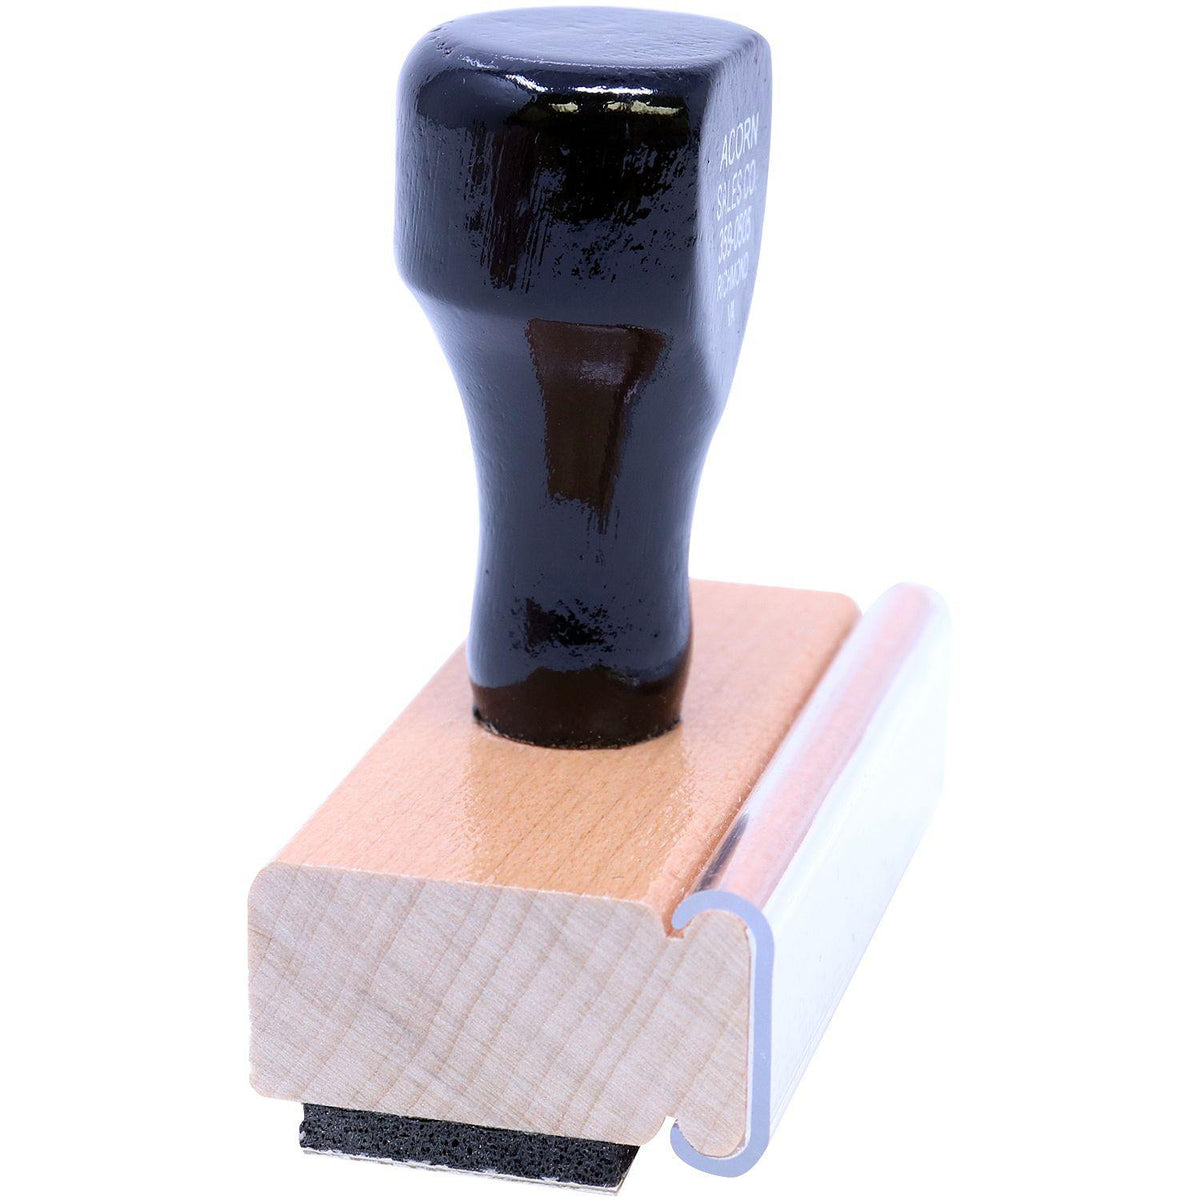 Side View of For Deposit Only with Line Rubber Stamp at an Angle